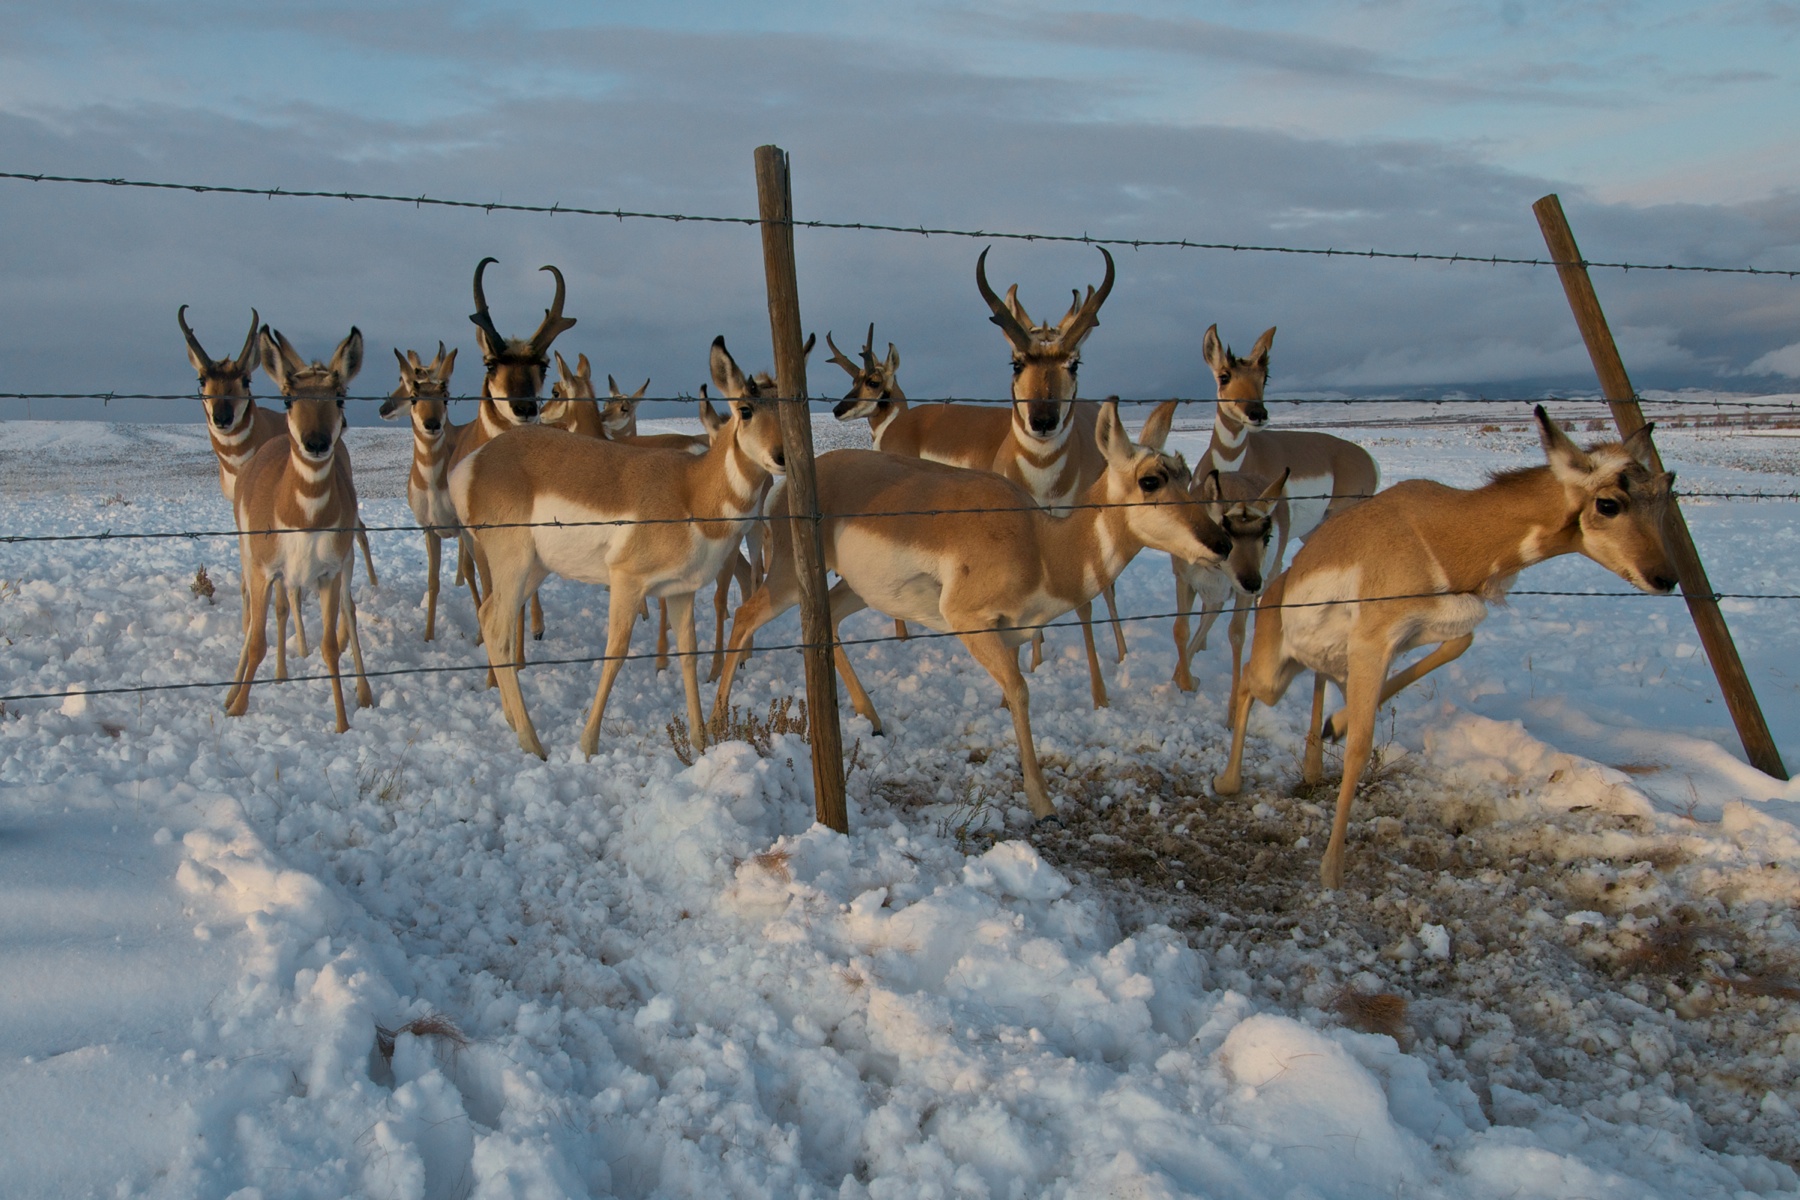 Migrating pronghorns encounter a logjam at a barbed wire fence near a highway. While an underpass existed to facilitate wildlife crossings, the ungulates shied away from the tunnel, preferring to instead breach the fence to cross the road. The state constructed two highway overpasses in 2012, and camera traps have detected thousands of crossings every year since, according to Kays. Credit: Joe Riis. Courtesy of "Candid Creatures: How Camera Traps Reveal the Mysteries of Nature," by Roland Kays (May 2016, Johns Hopkins University Press